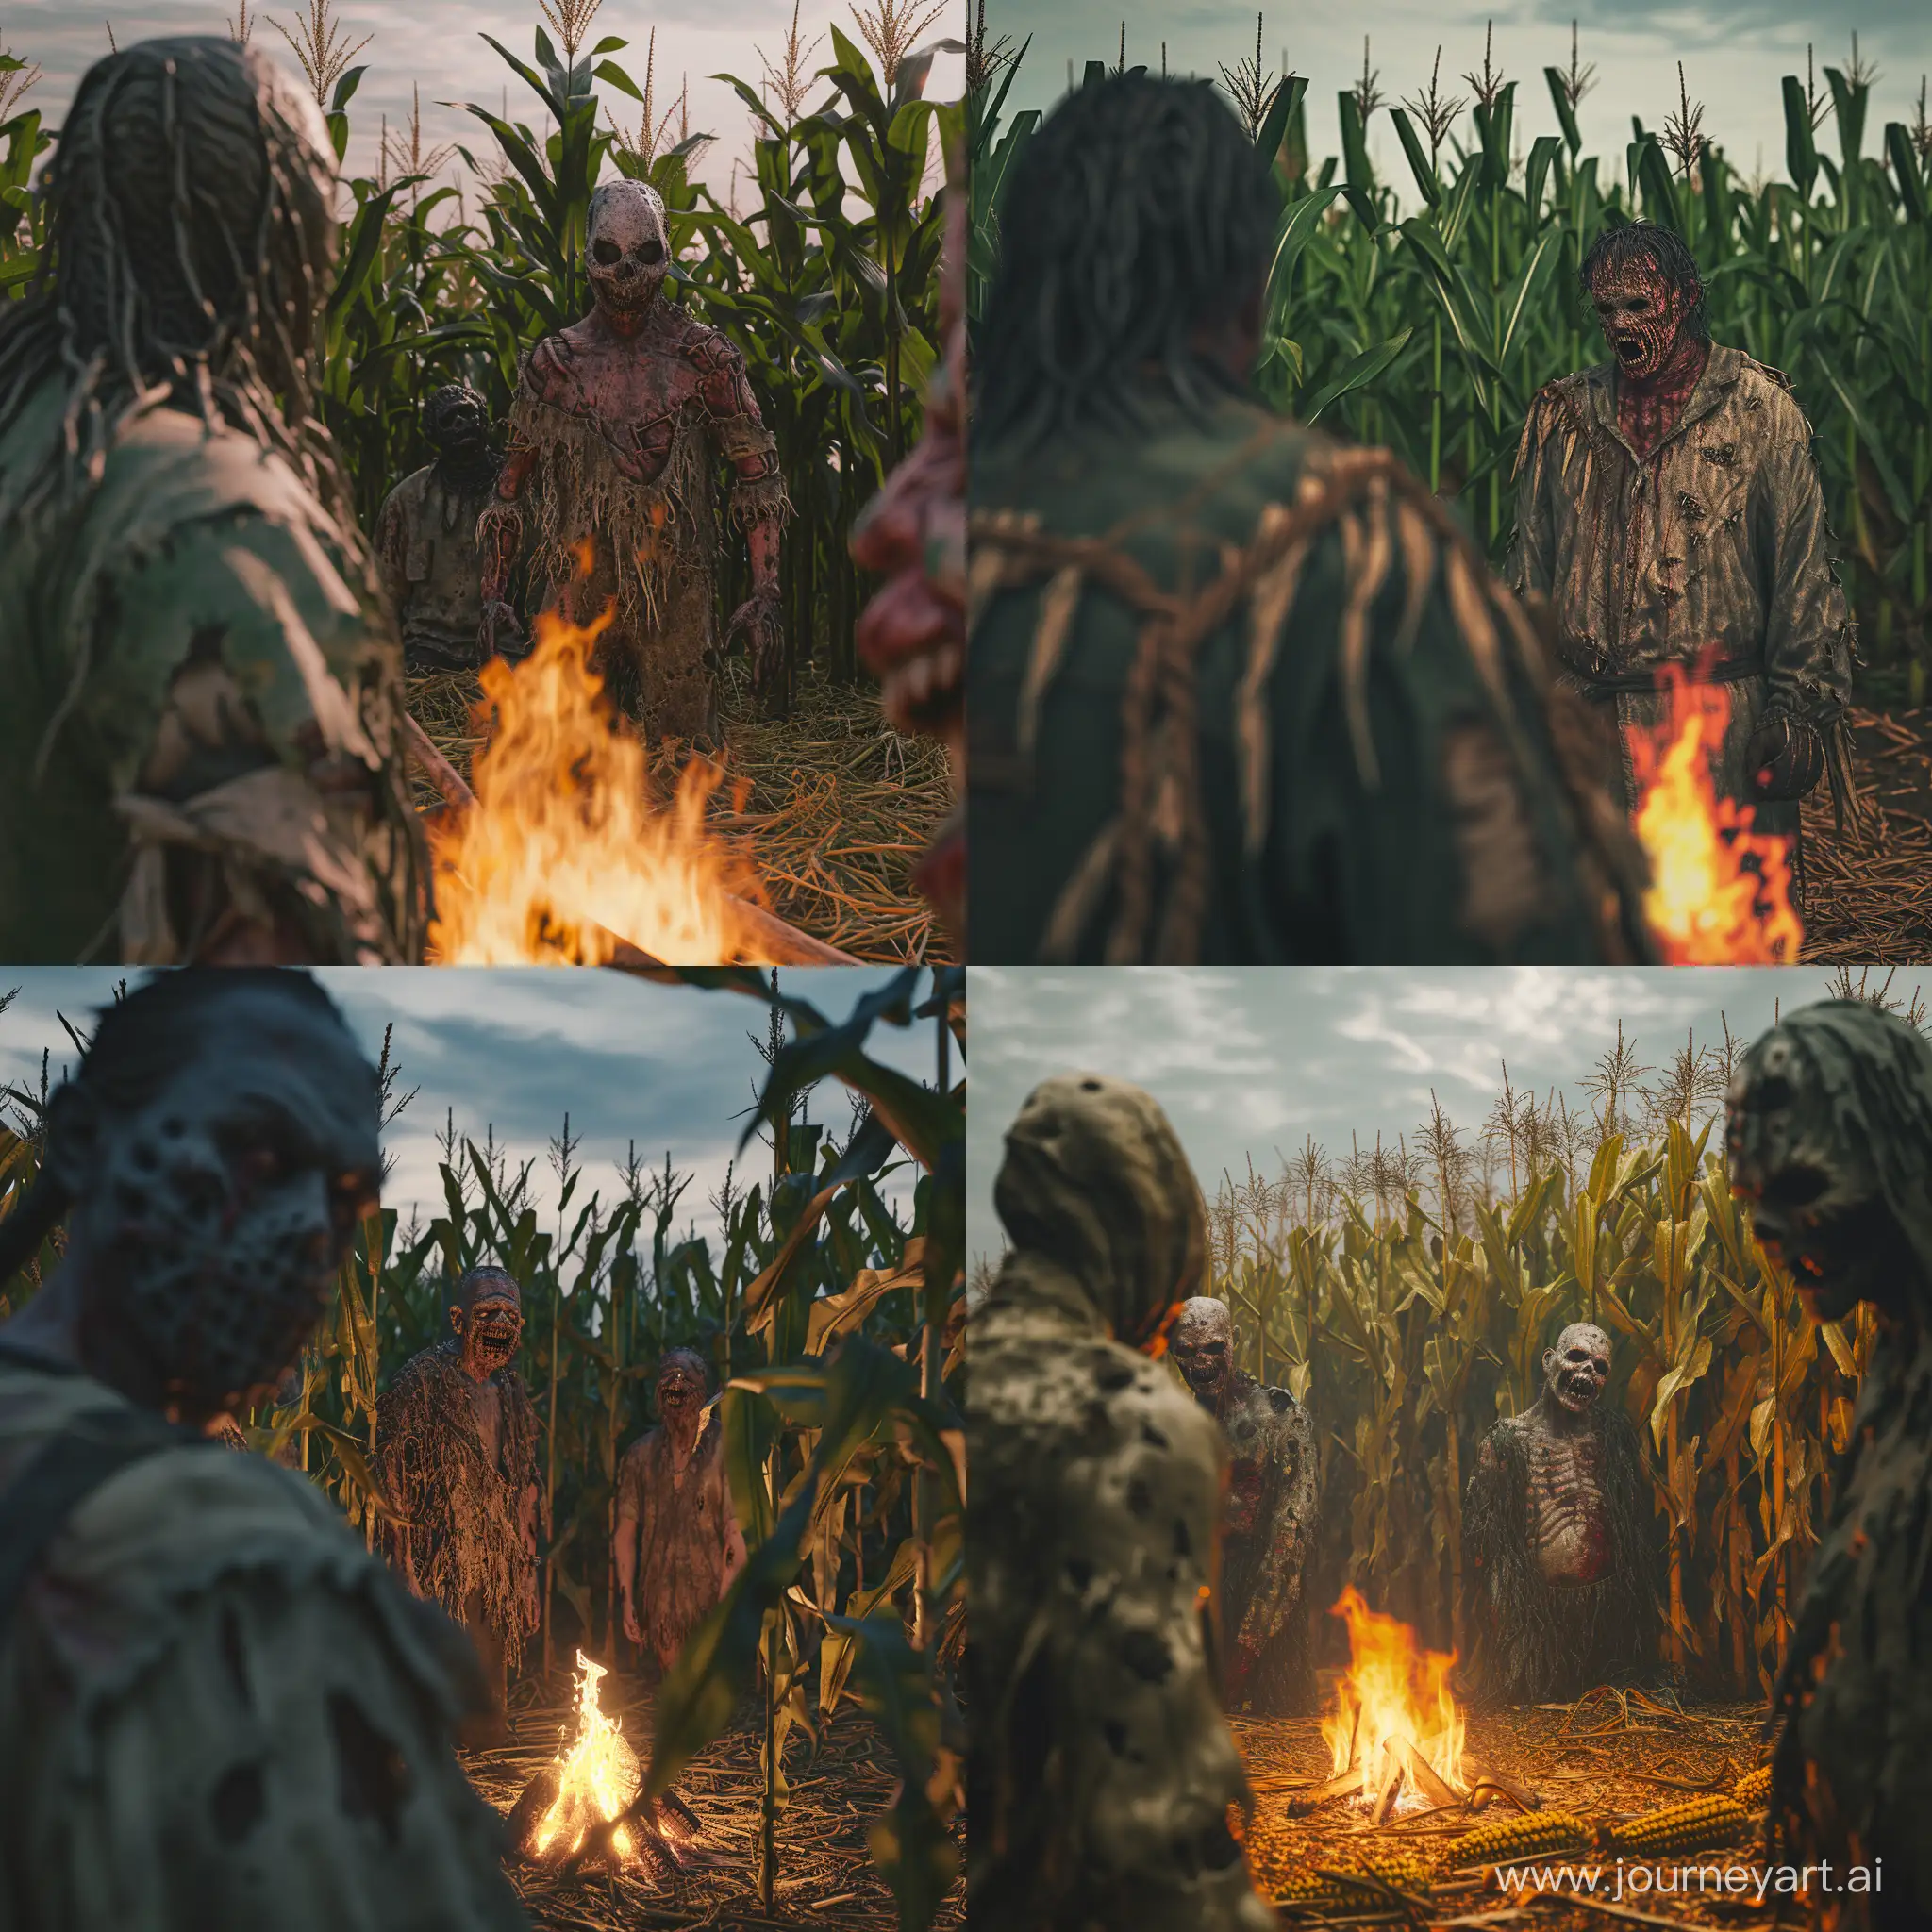 Eerie-Figures-in-Ragged-Attire-Amidst-Cornfield-by-Campfire